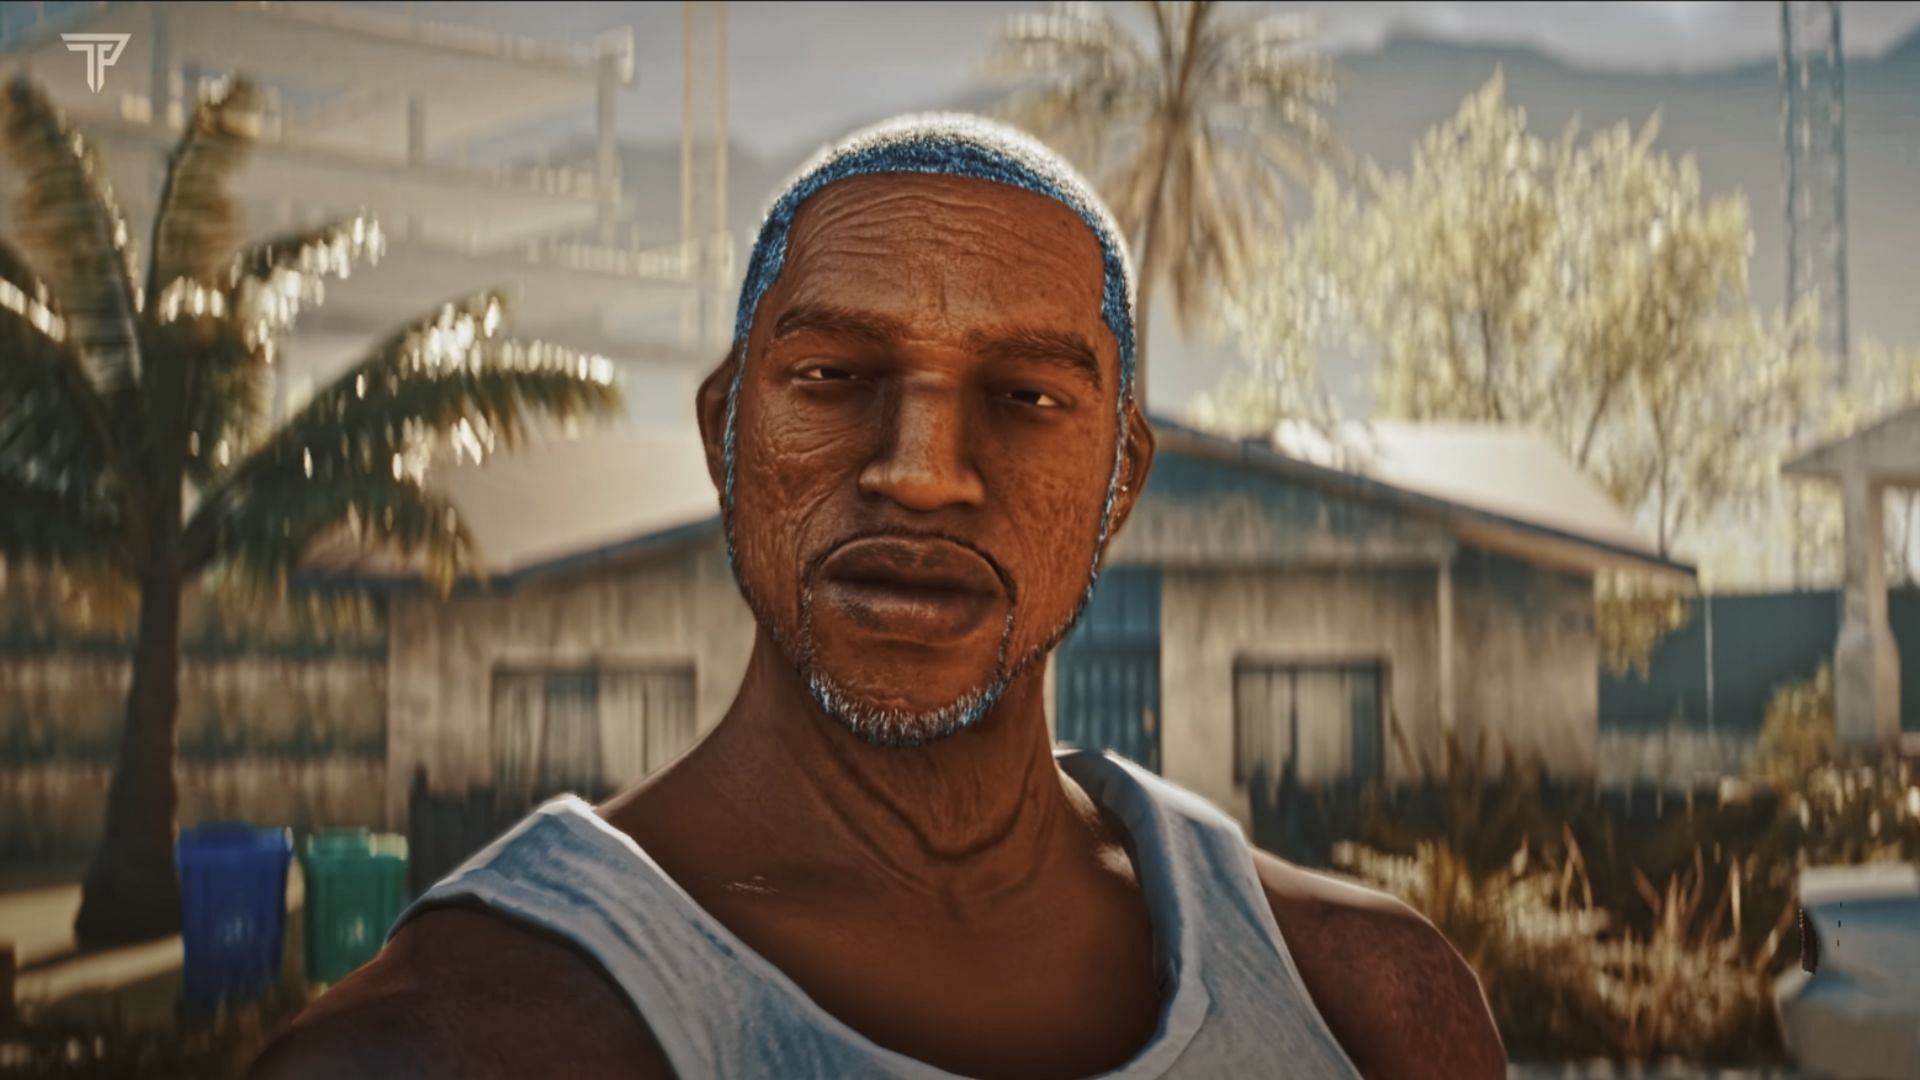 Games: Part 2: Grand Theft Auto: San Andreas - Screens - The Austin  Chronicle